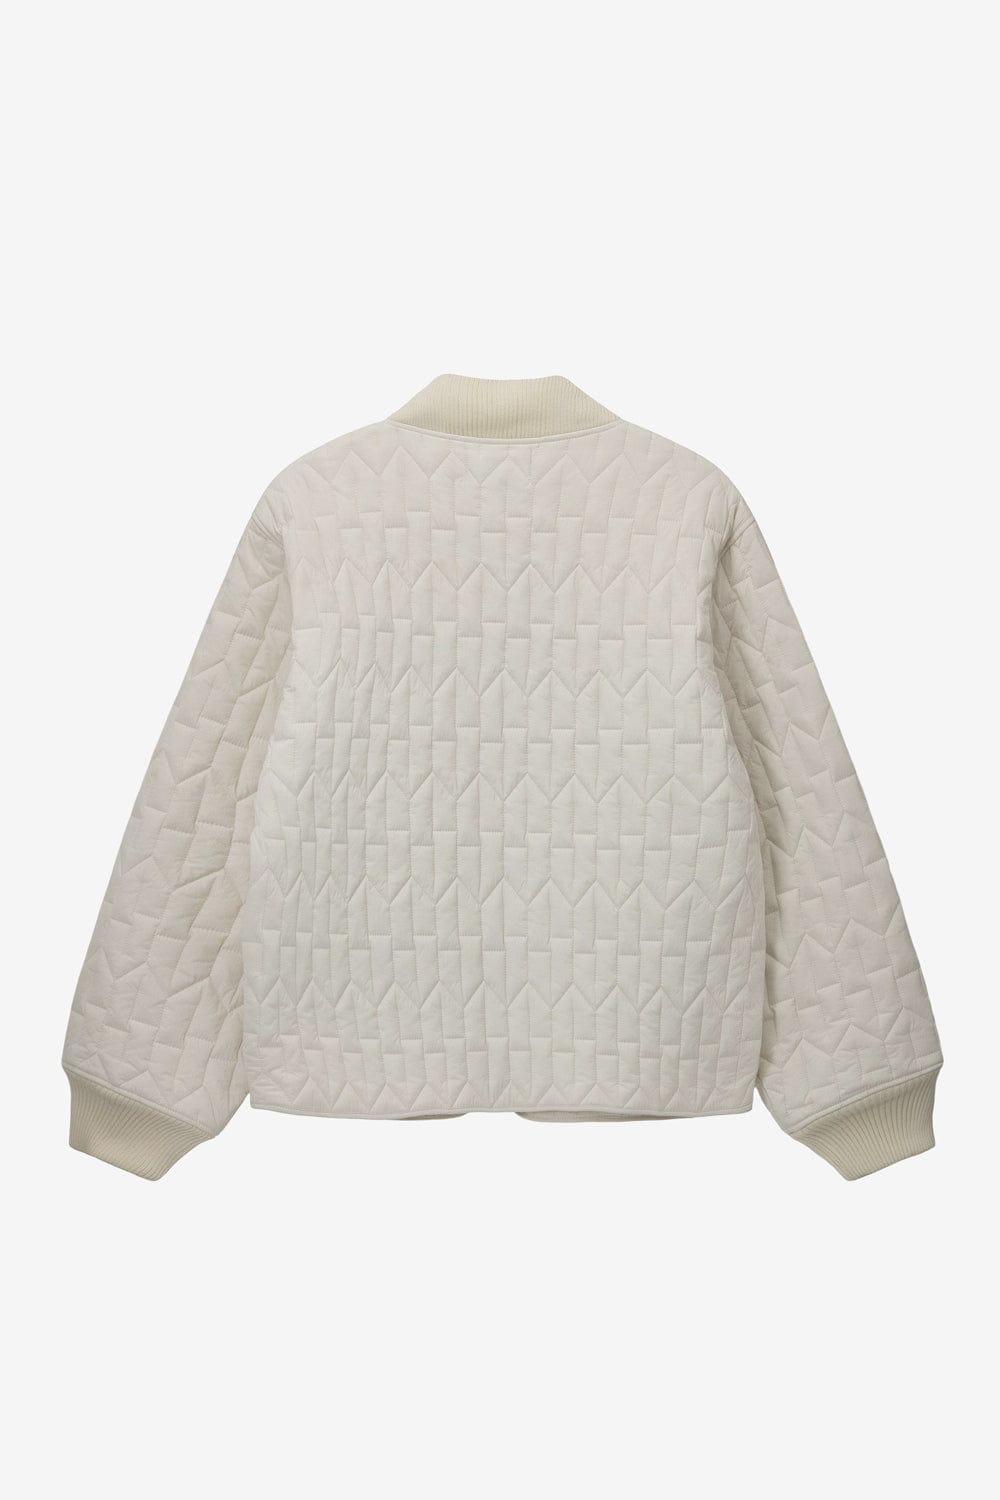 Stussy S Quilted Liner Jacket (Cream) - Commonwealth